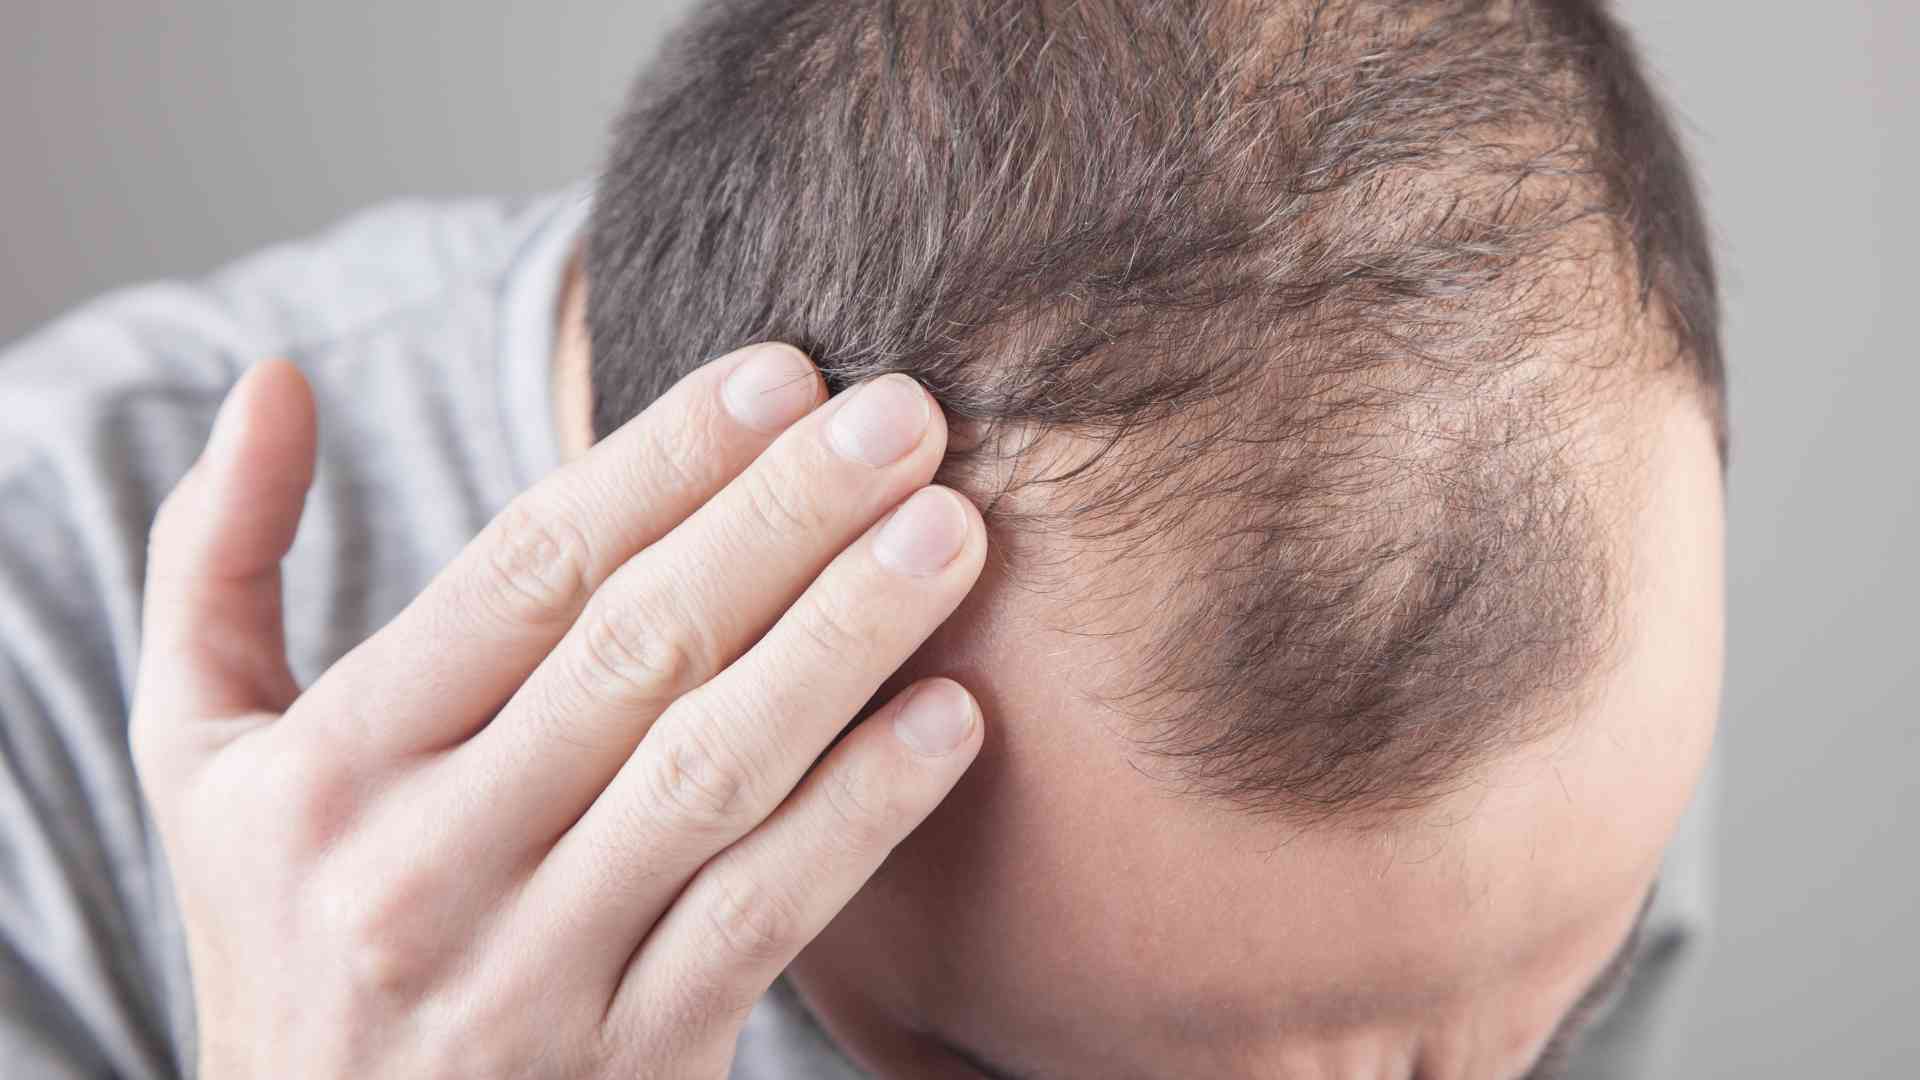 What are some overlooked environmental factors that contribute to hair loss